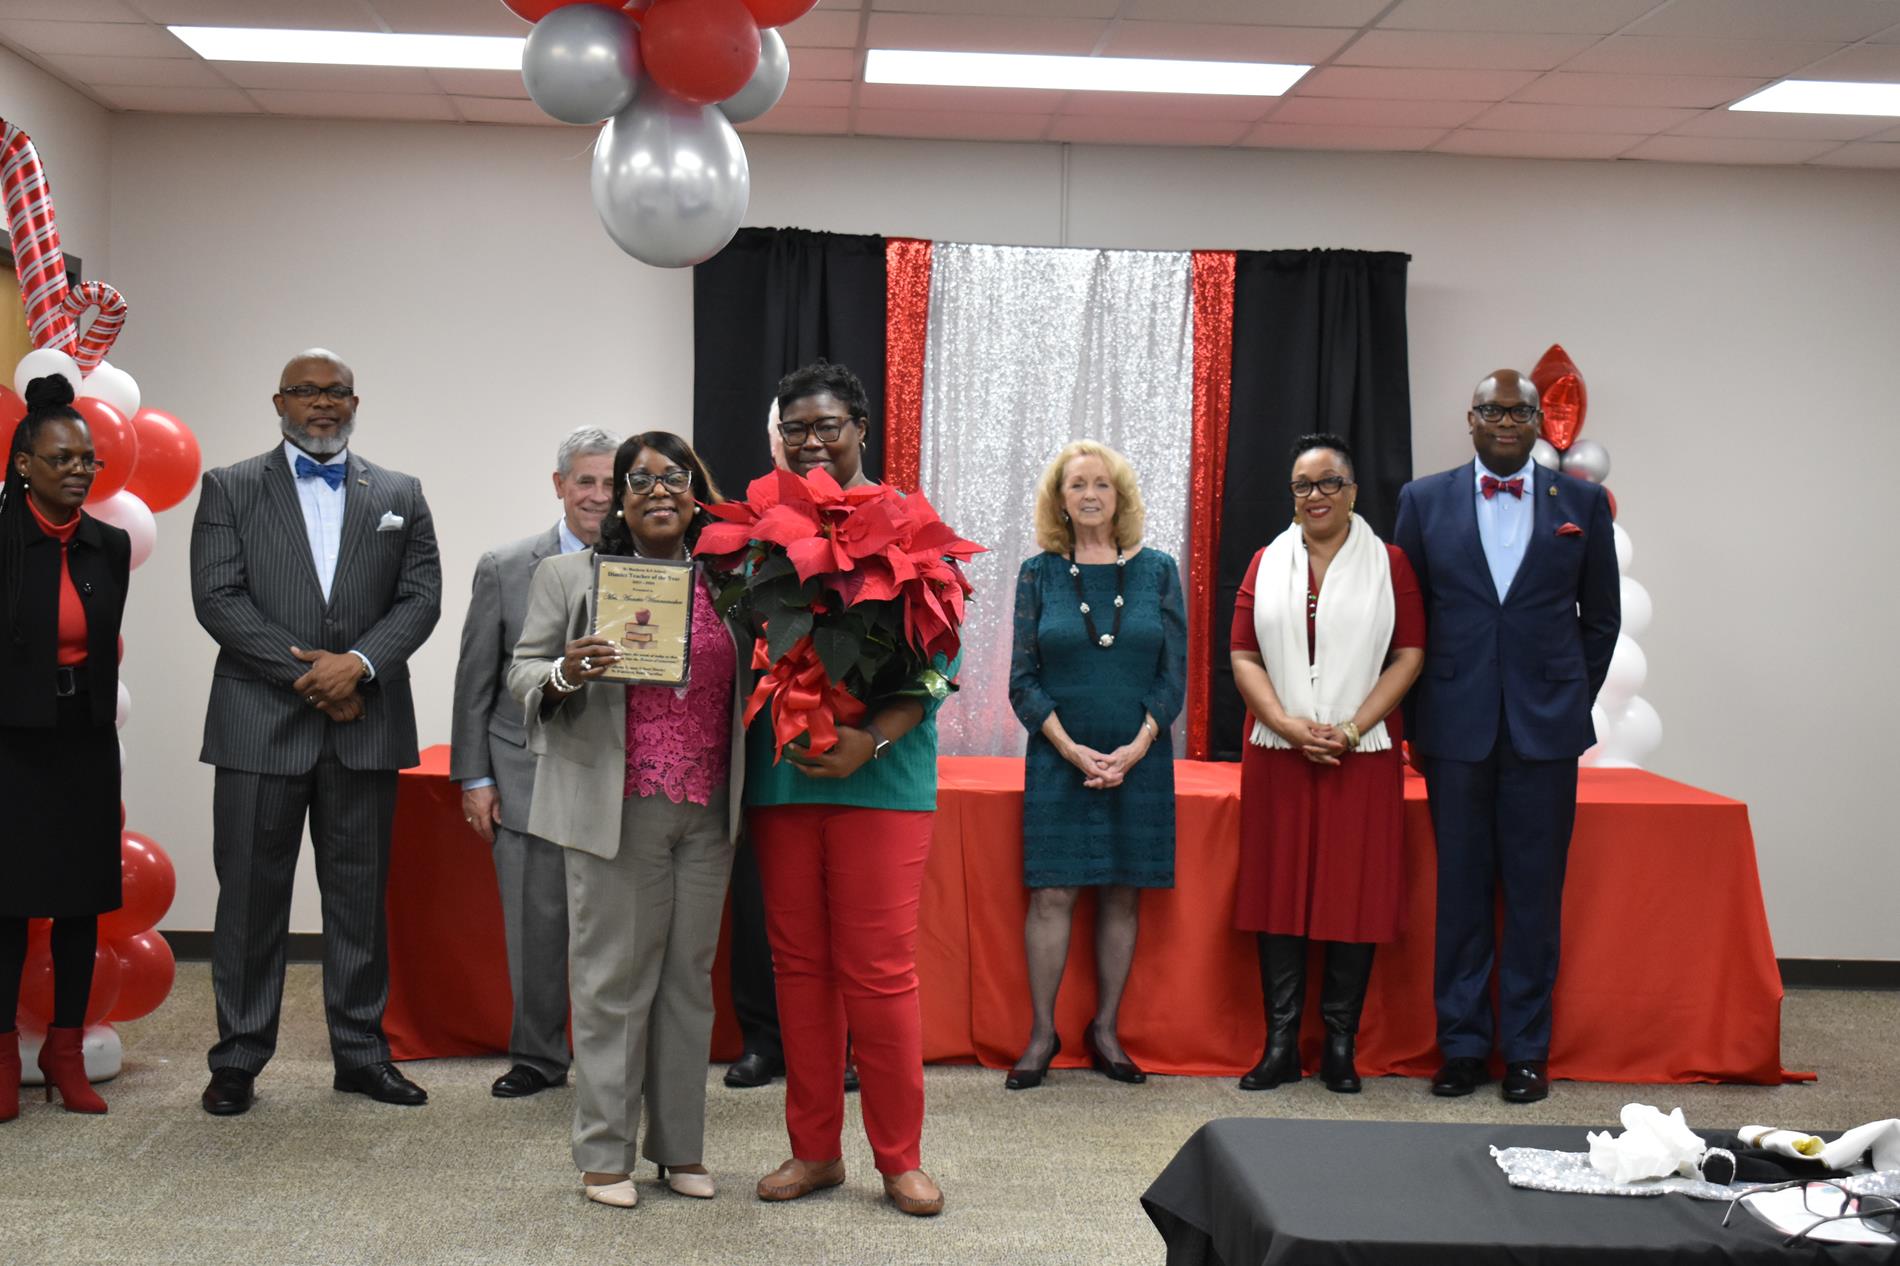 District Teacher of the Year being honored at the recent ceremony.